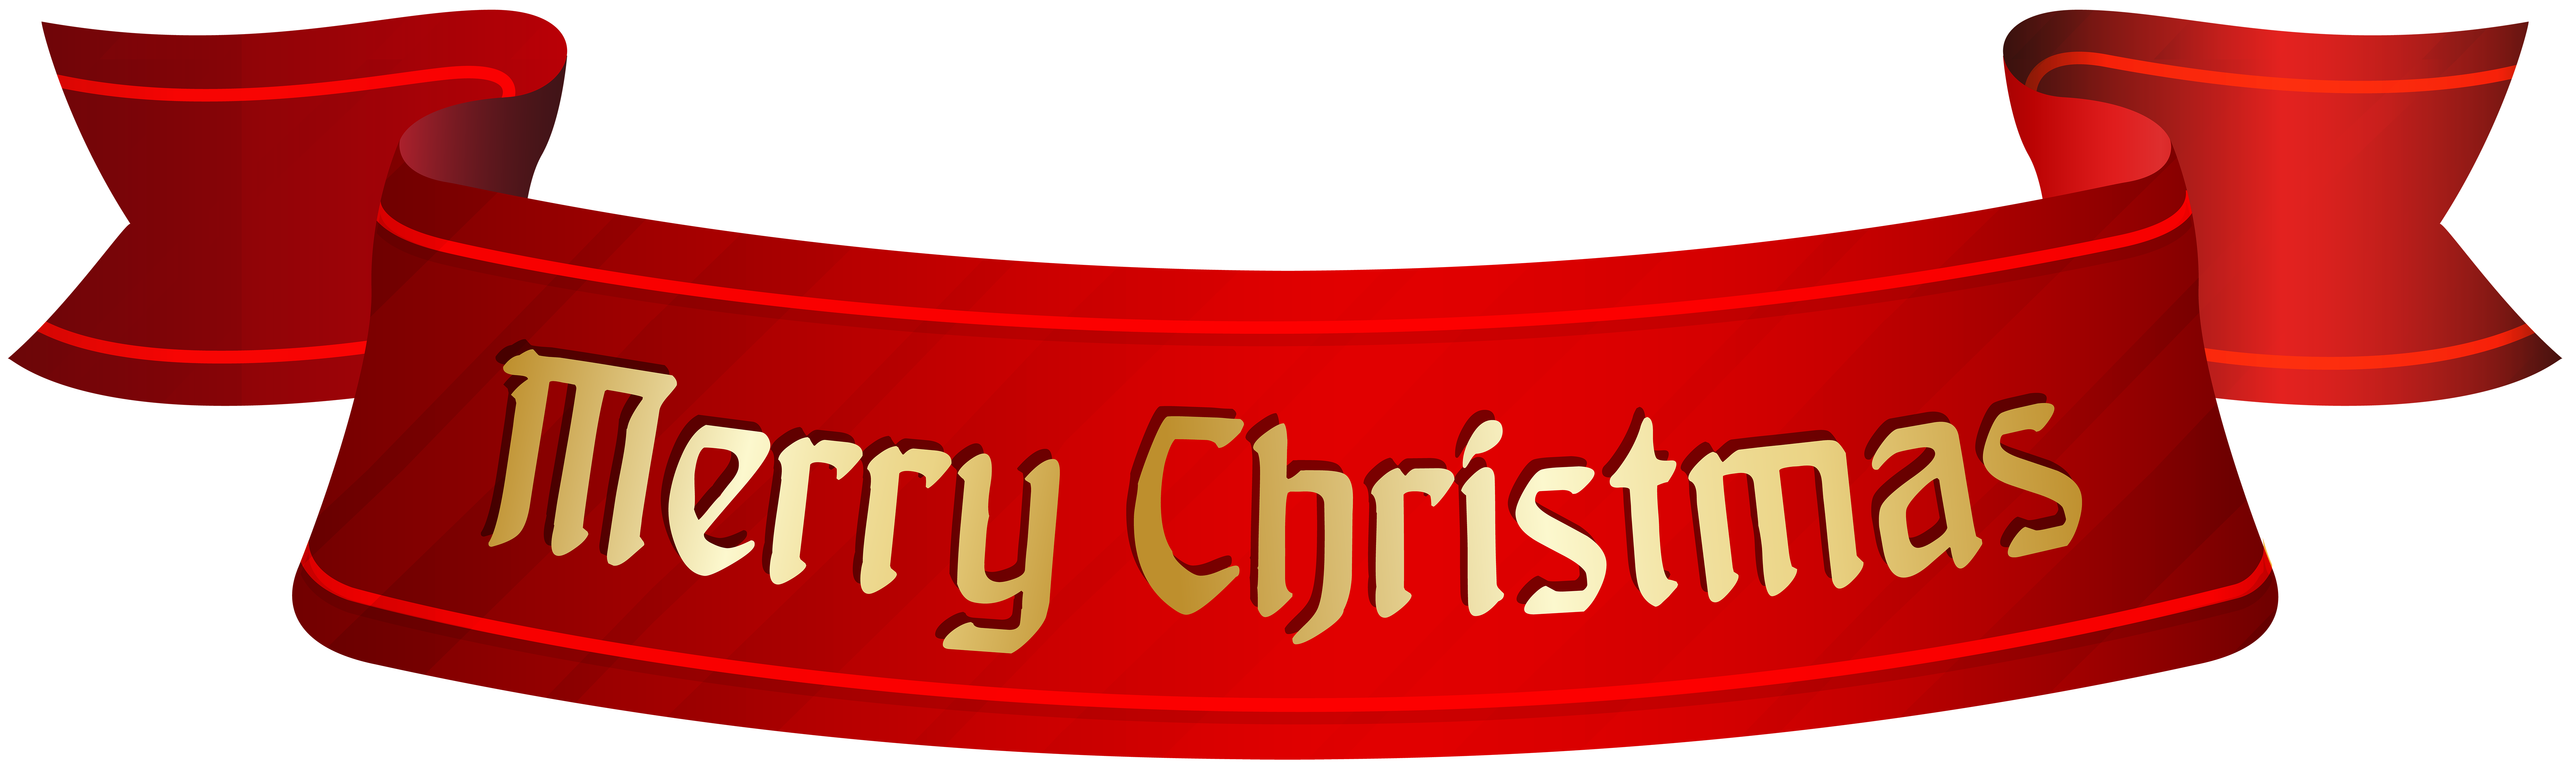 Merry Christmas Banner PNG Clip Art | Gallery Yopriceville - High ...